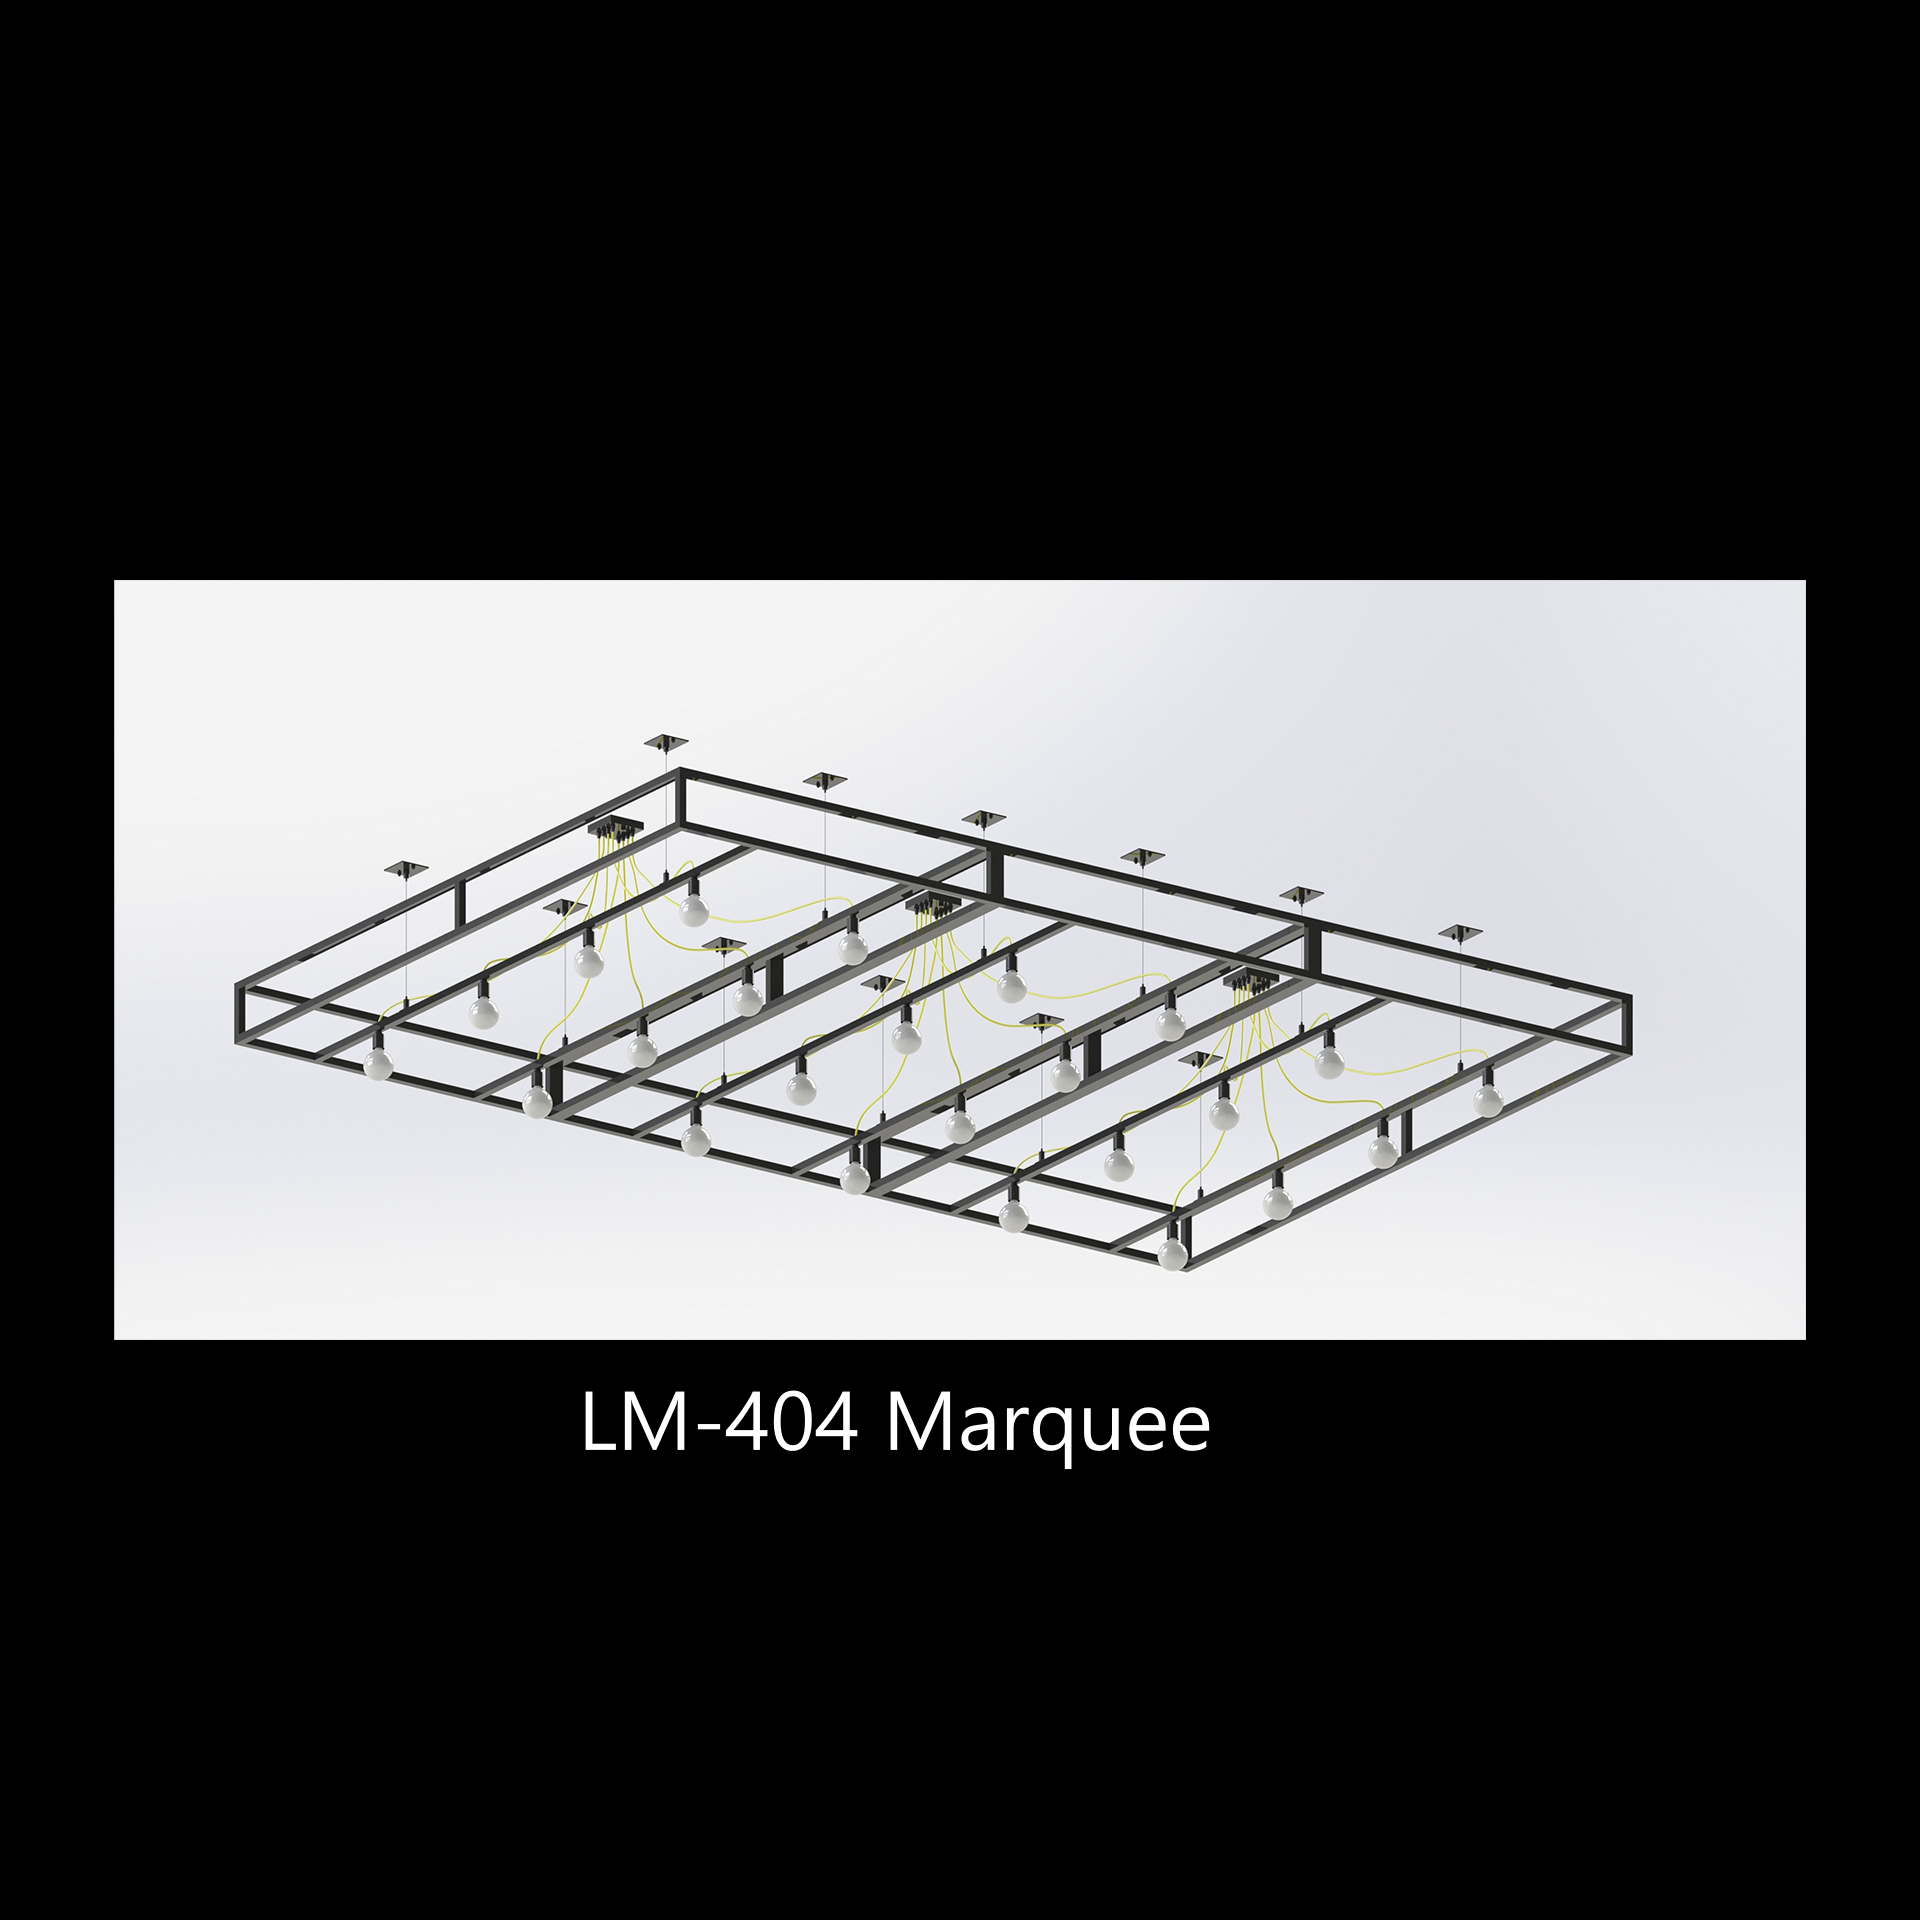 LM-404 Marquee